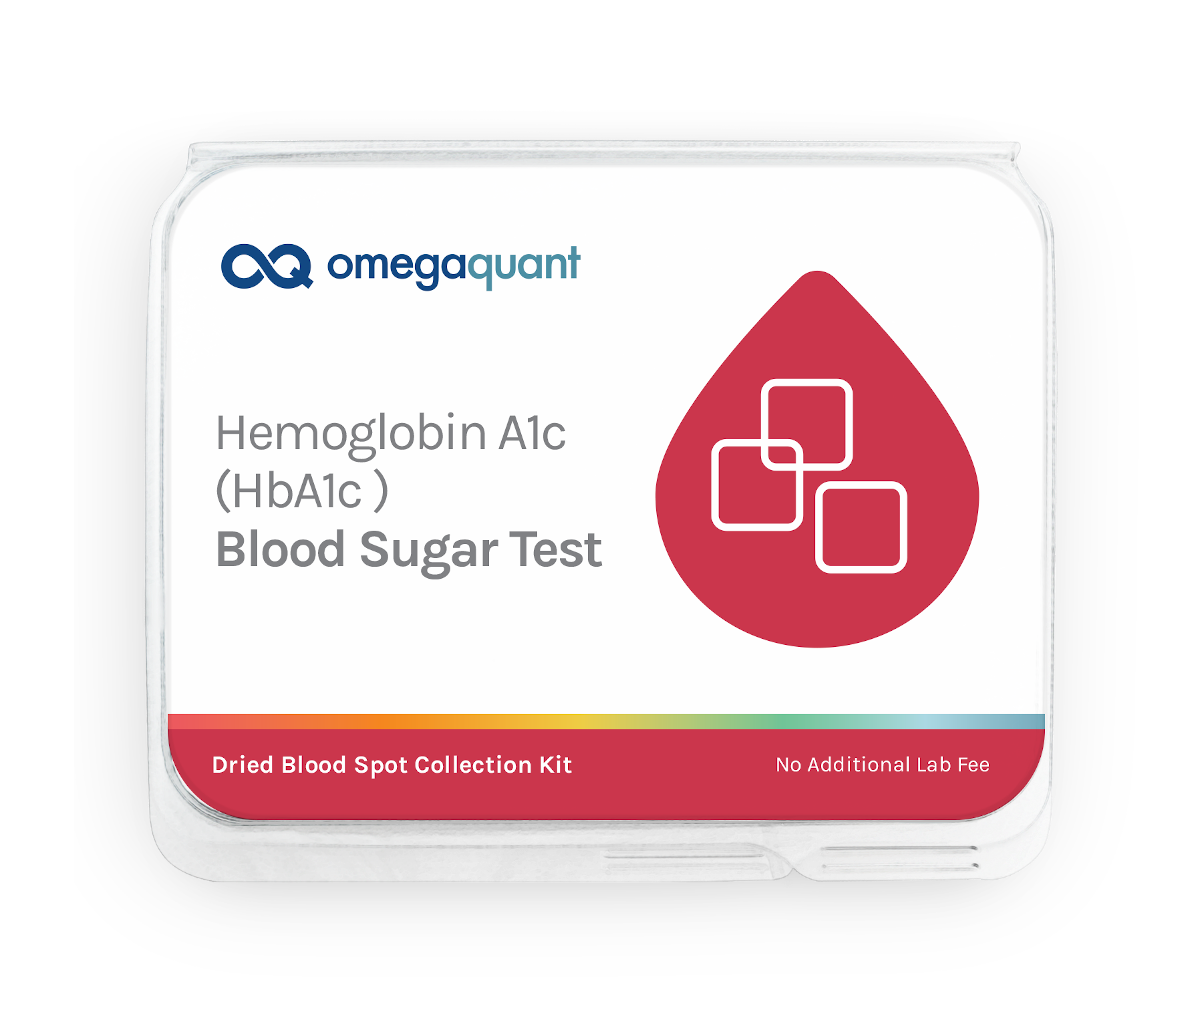 OmegaQuant launches HbA1c Test to measure blood sugar